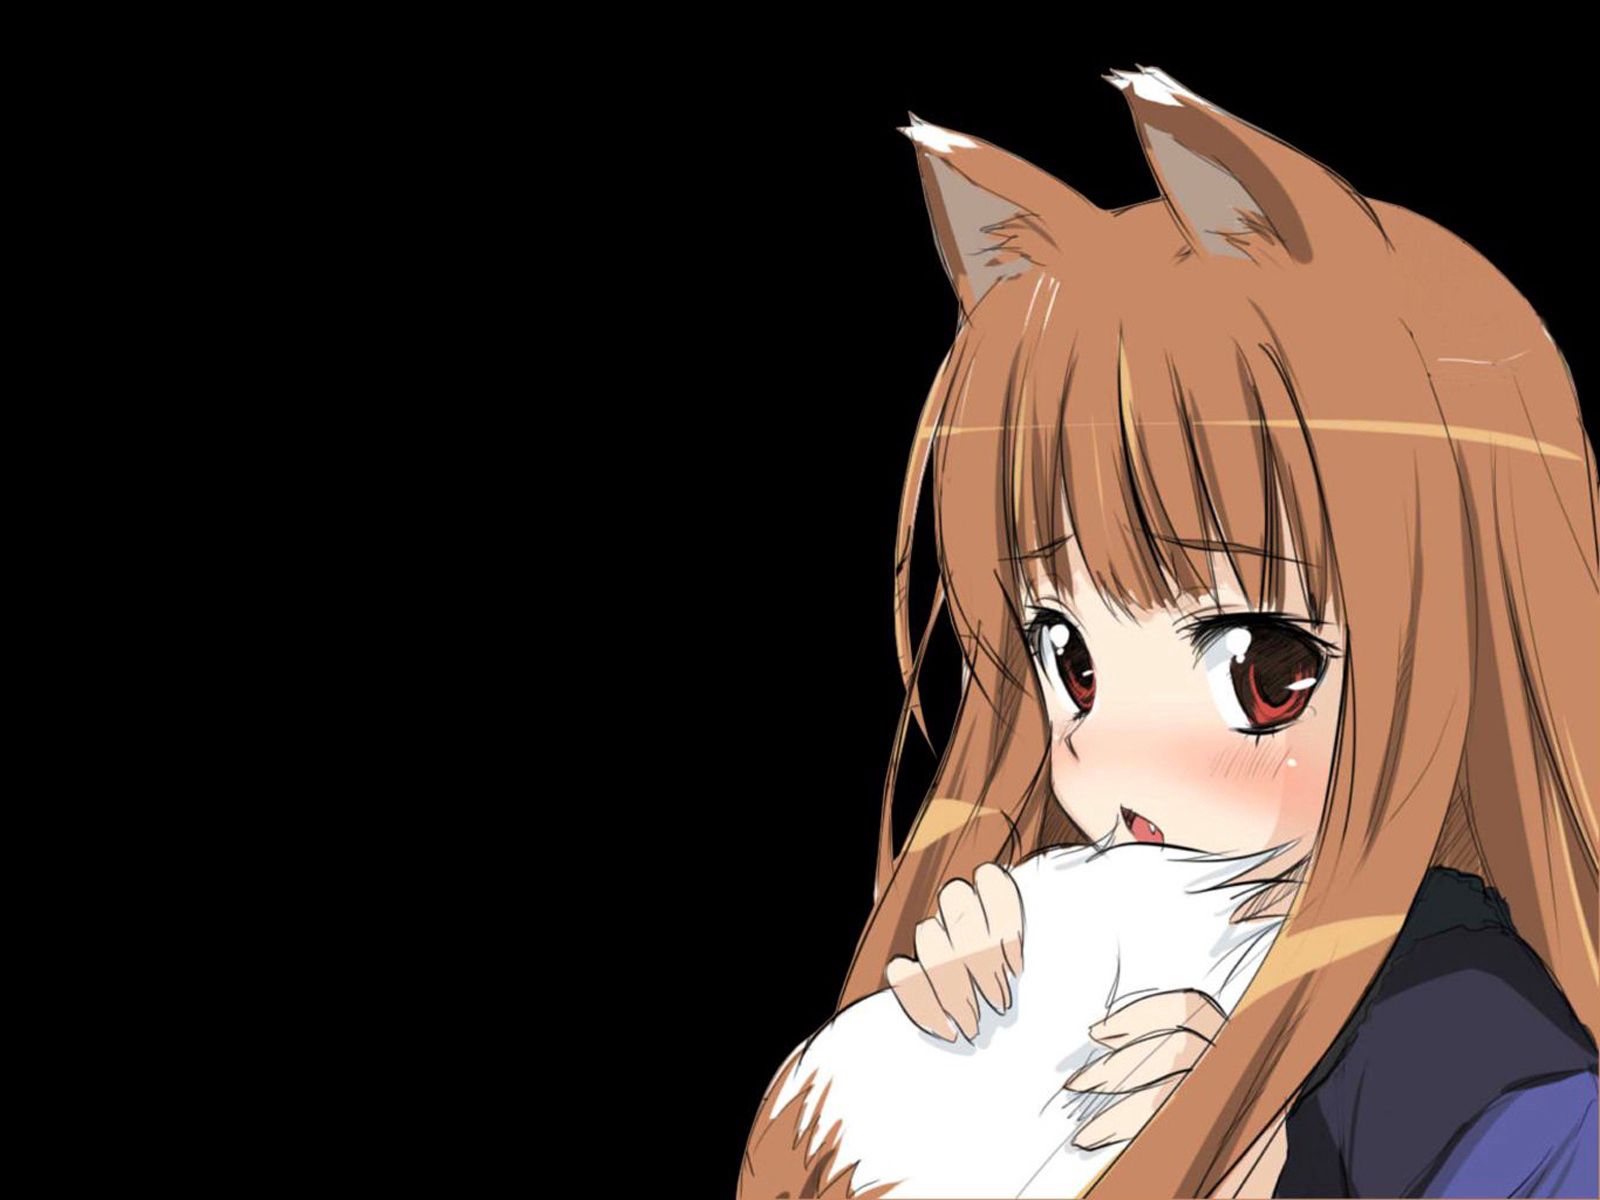 Spice and Wolf Anime Wallpapers 52 images inside